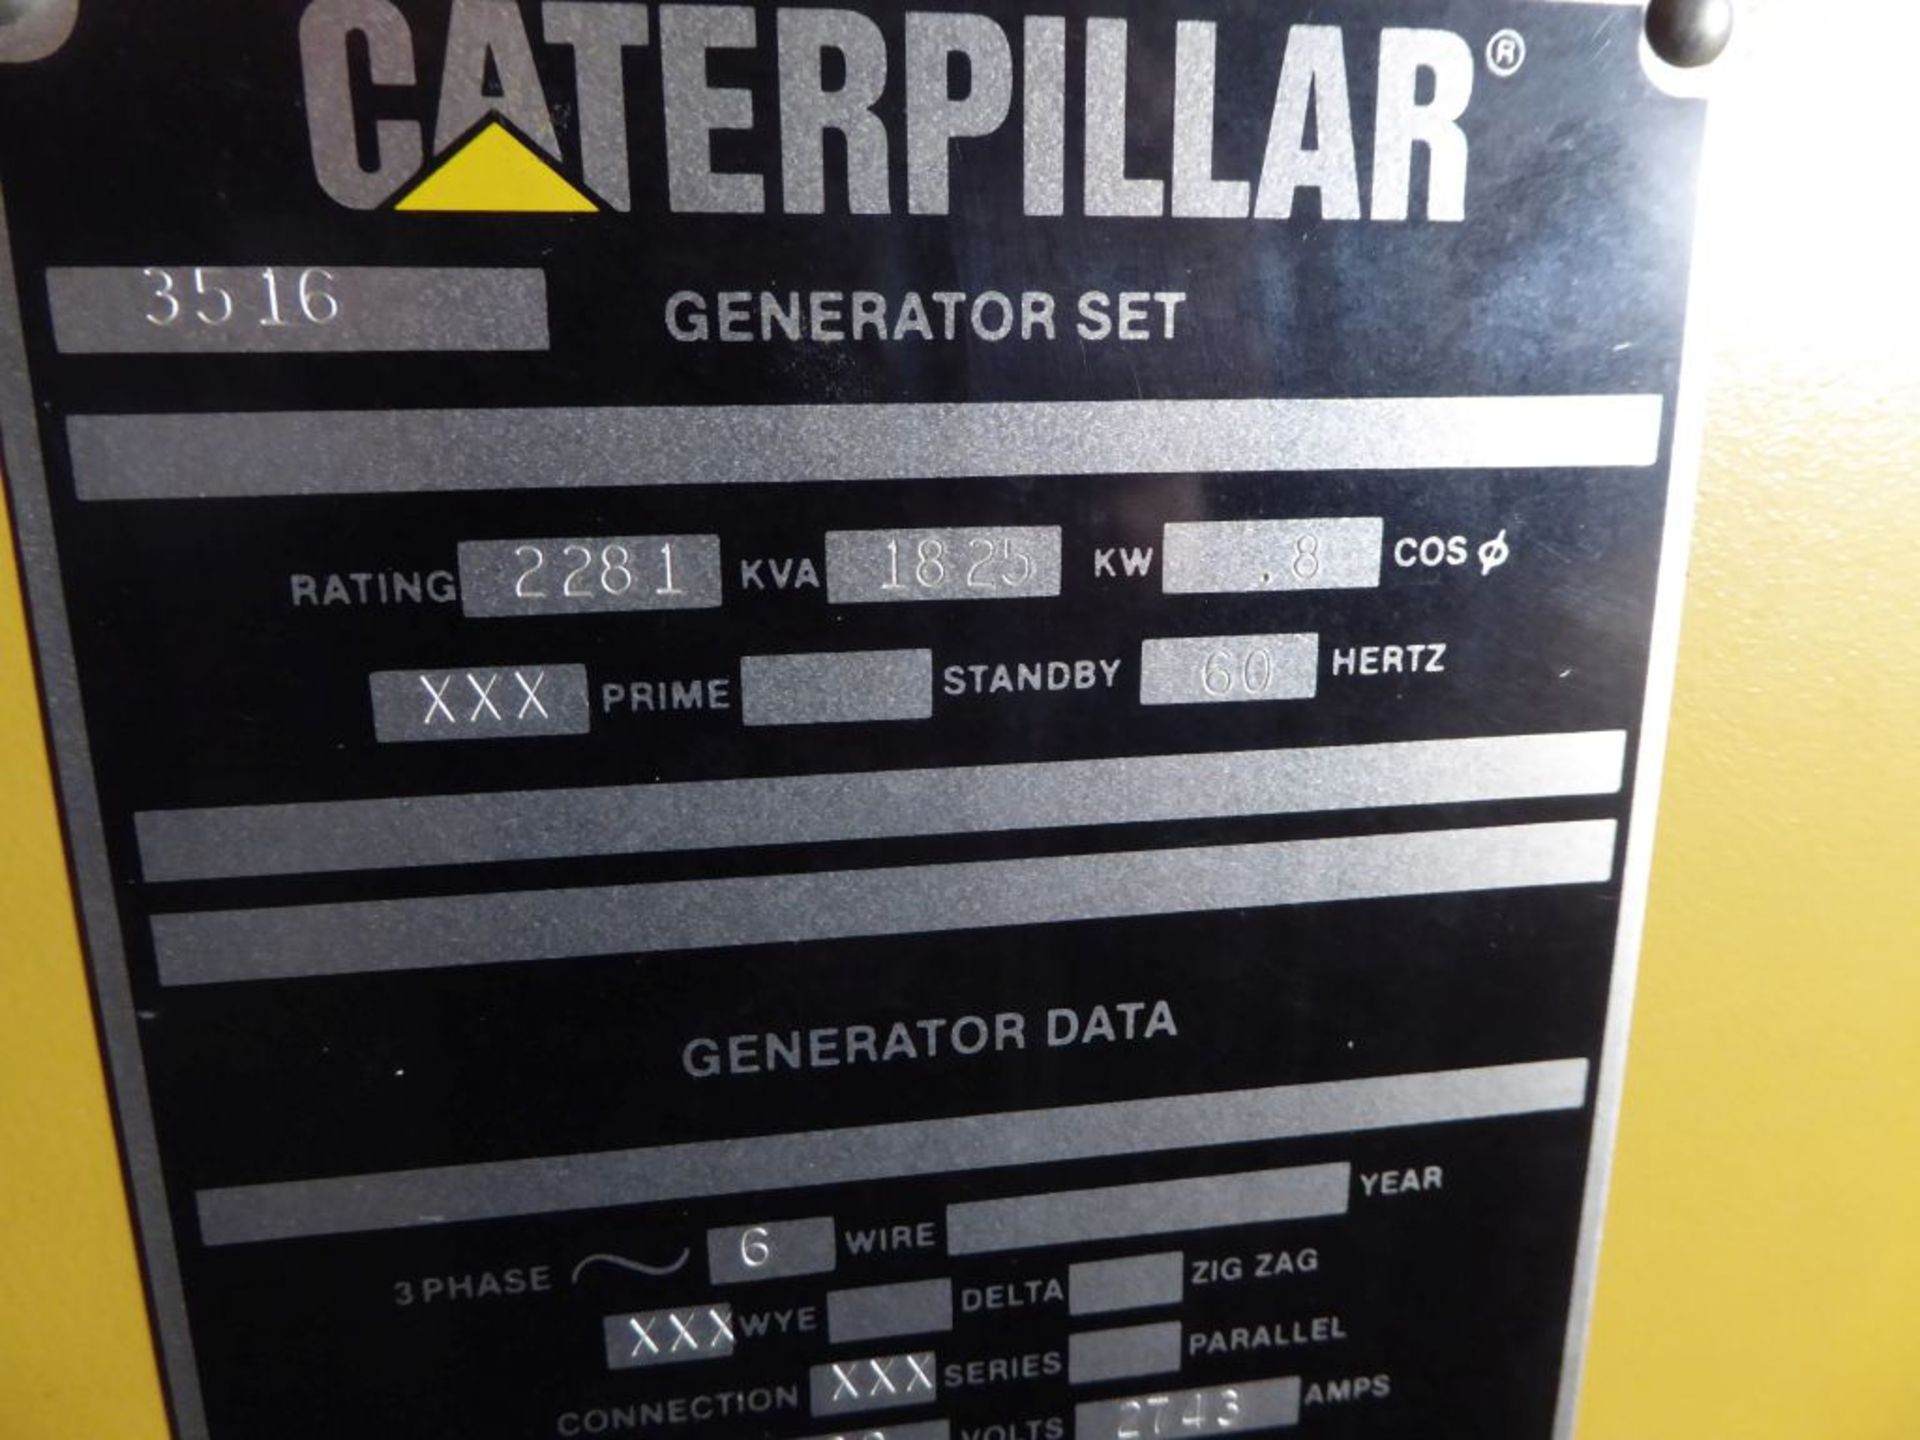 Located in St. Louis Park, MN - Caterpillar Generator with Enclosure - Image 13 of 48